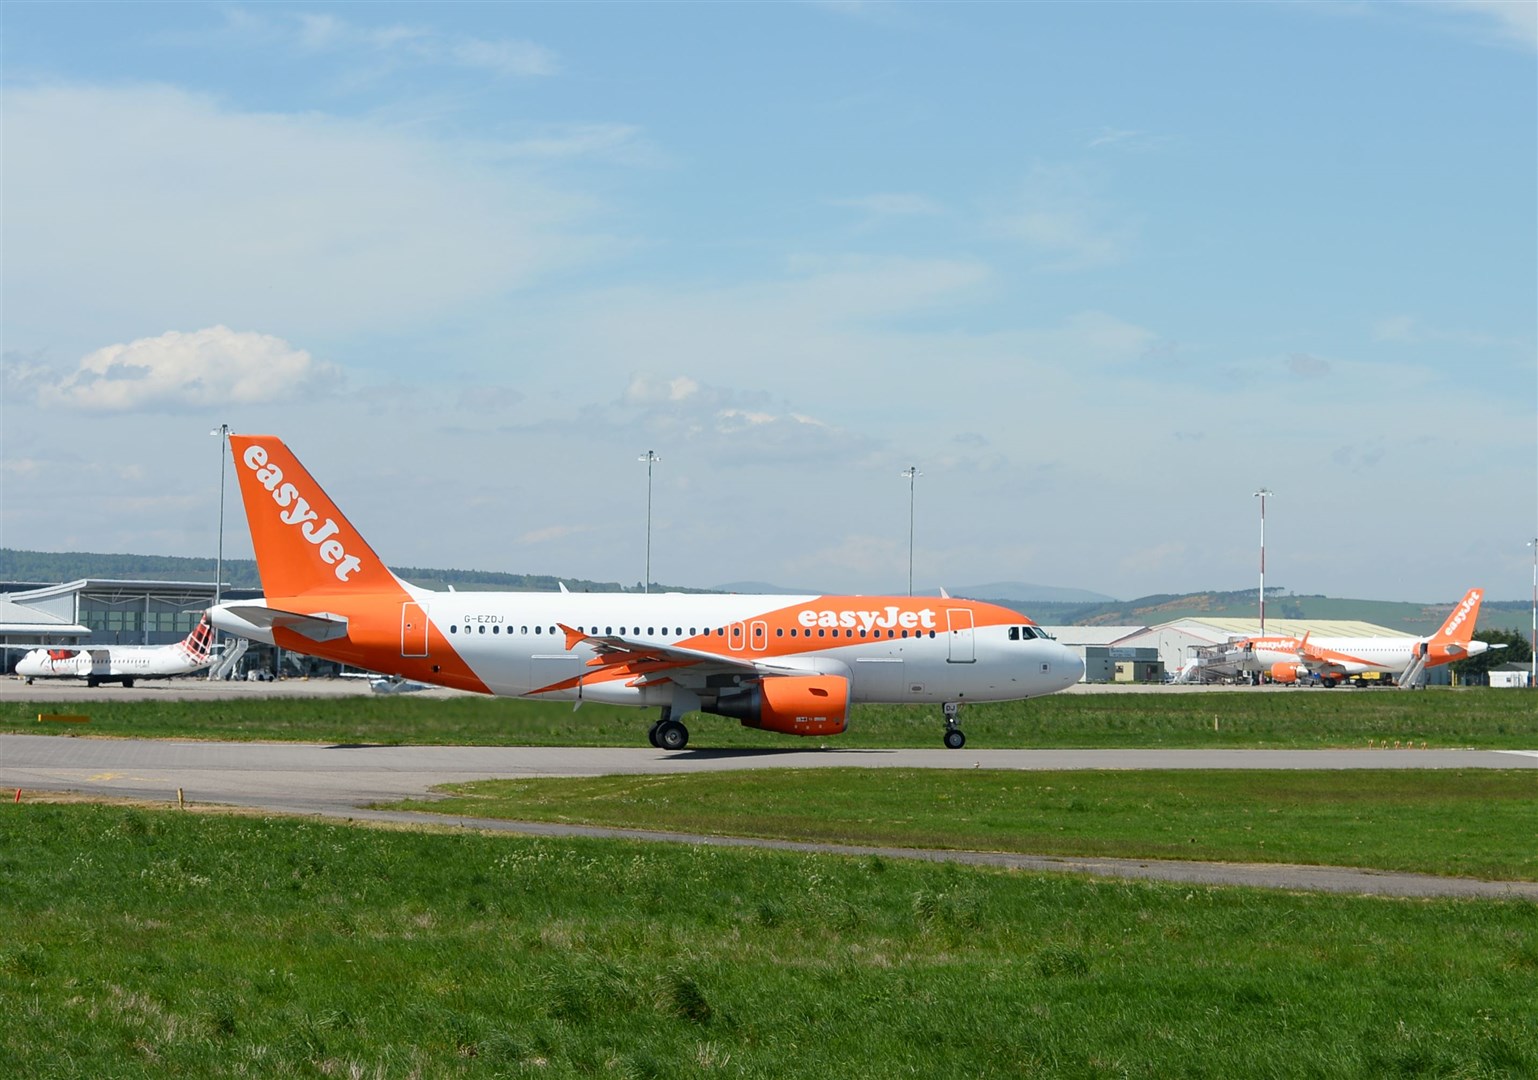 The easyJet flight from Bristol to Inverness returned to the airport soon after taking off.